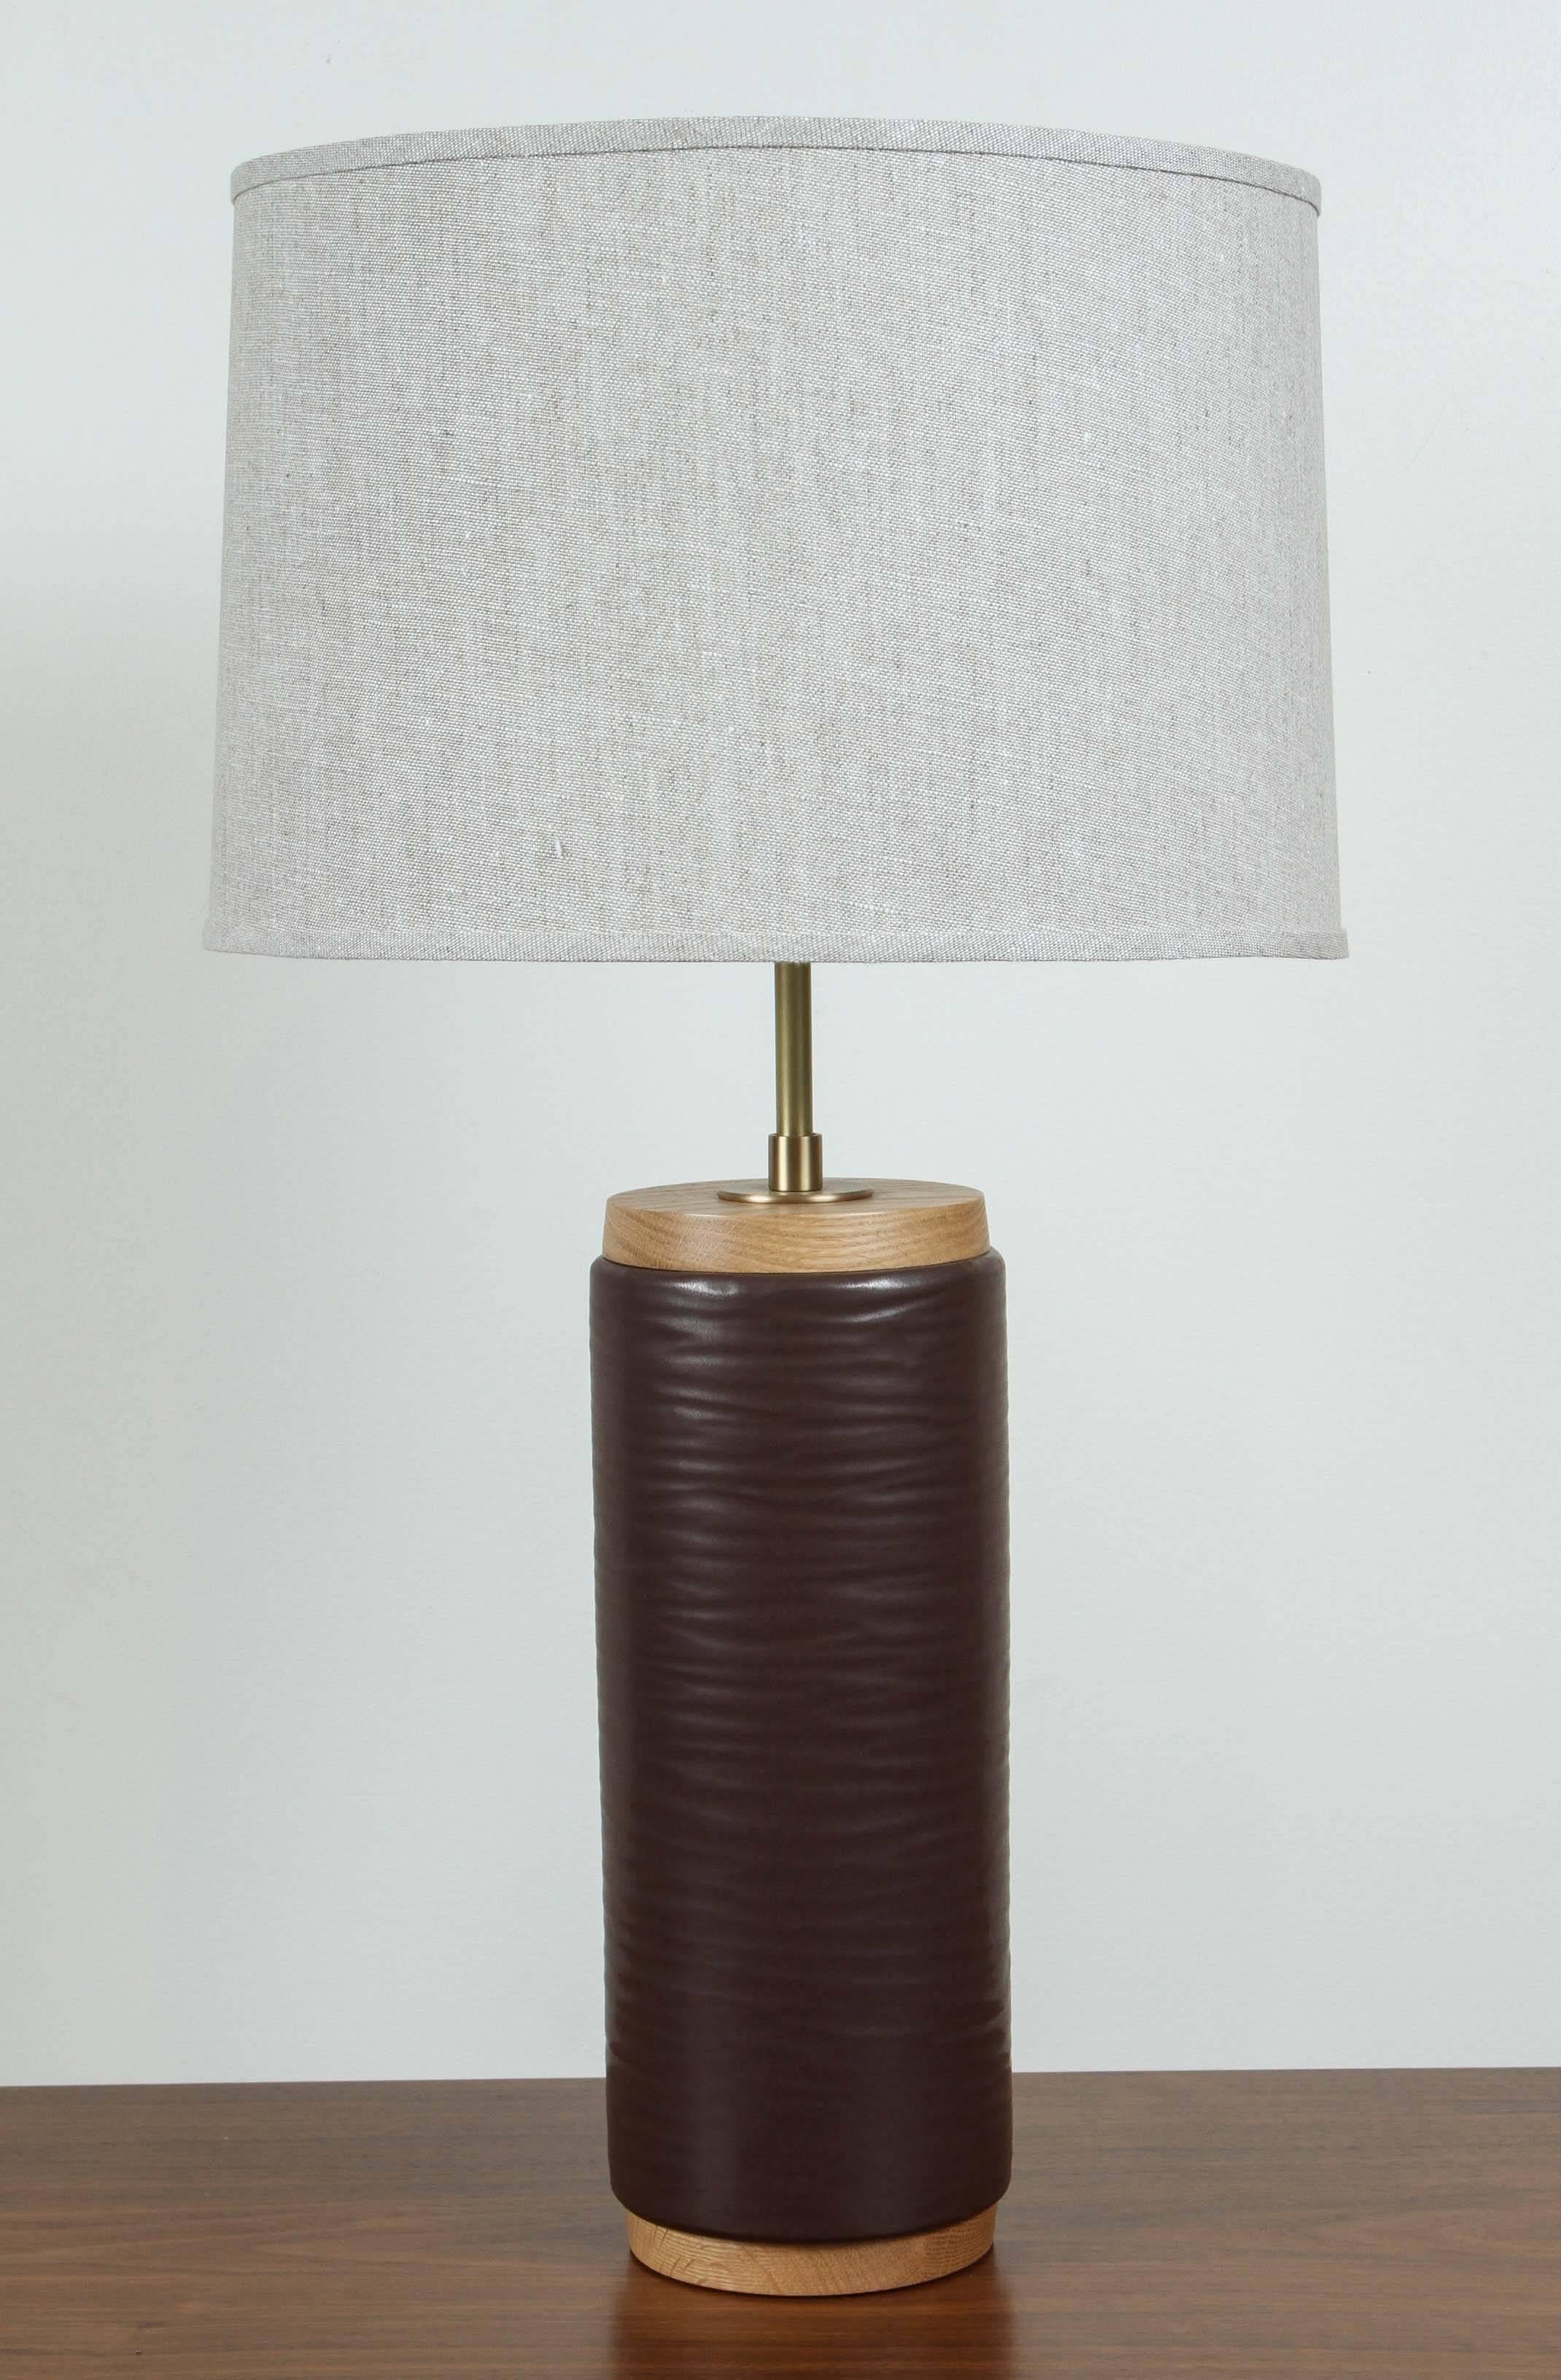 Mid-Century Modern Pair of Heyward Lamps by Stone and Sawyer for Lawson-Fenning